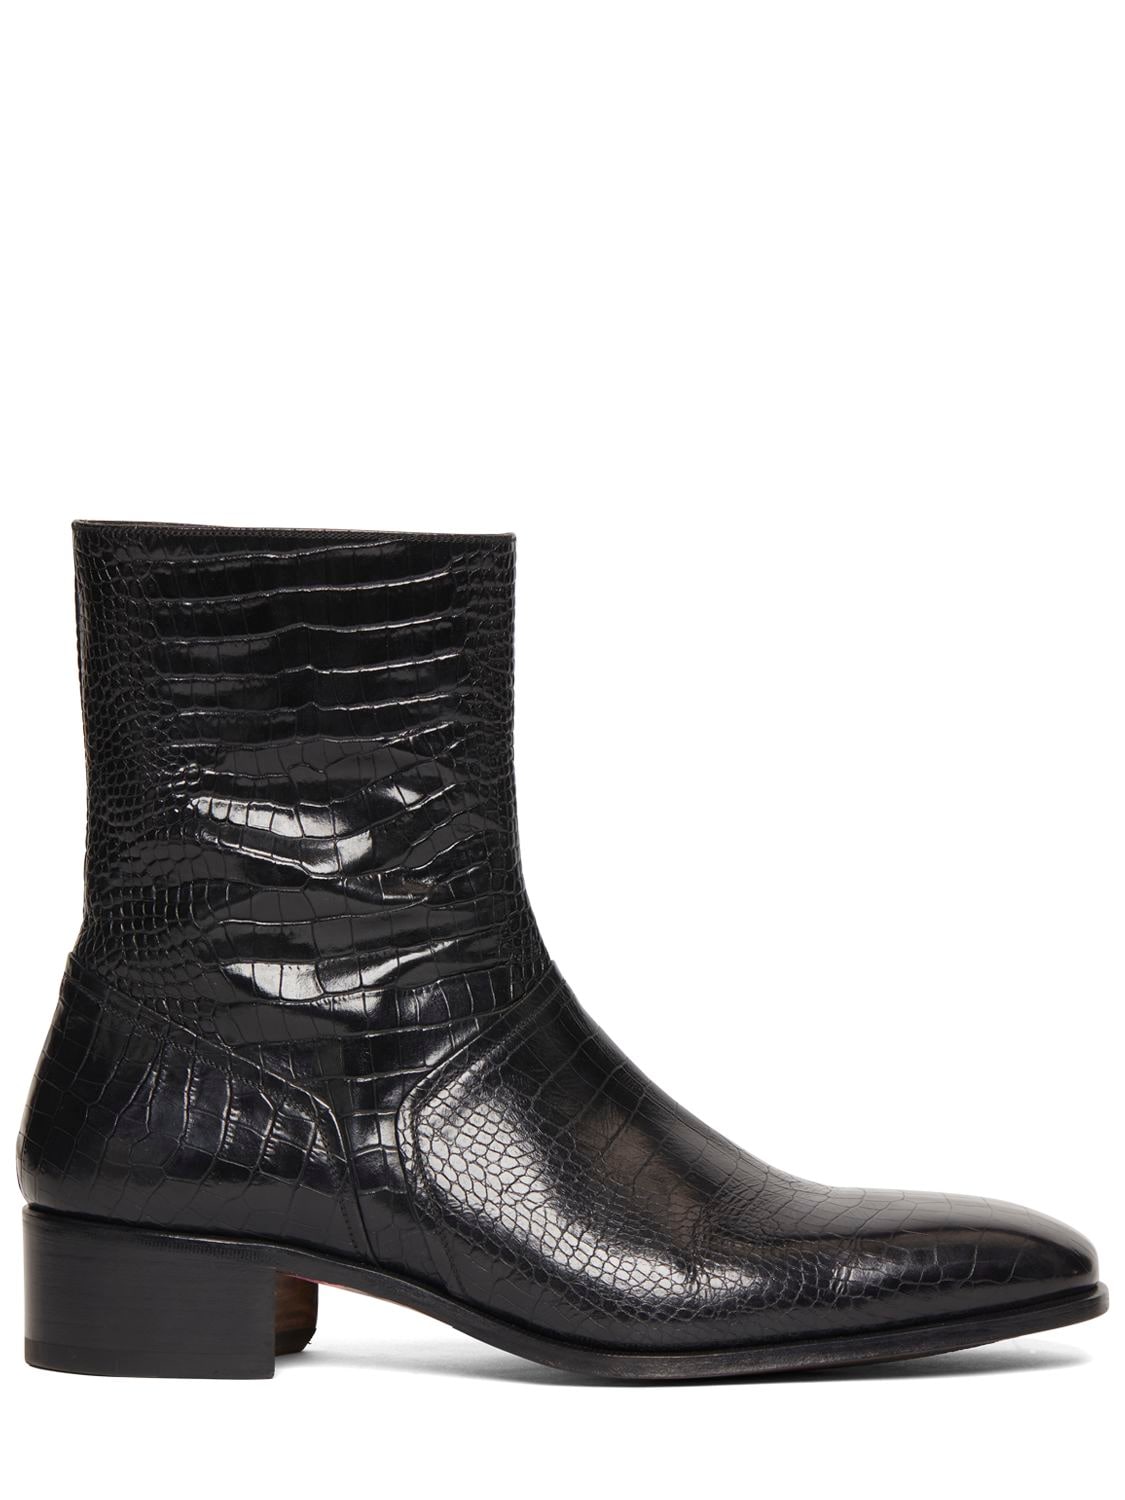 TOM FORD CROC EMBOSSED LEATHER ANKLE BOOTS